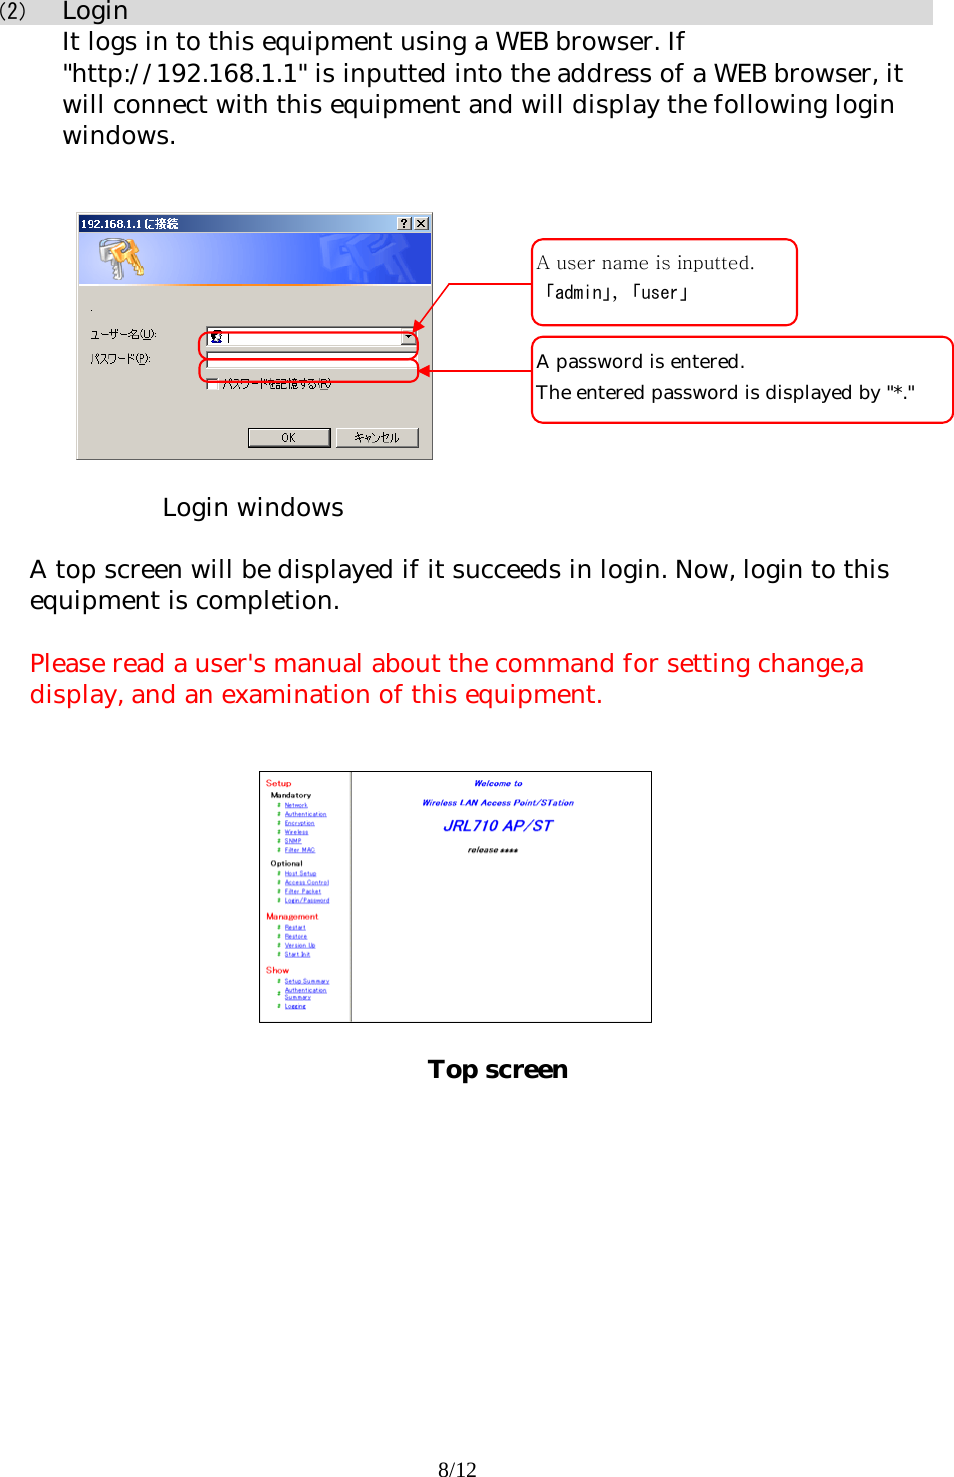 8/12  （2） Login It logs in to this equipment using a WEB browser. If &quot;http://192.168.1.1&quot; is inputted into the address of a WEB browser, it will connect with this equipment and will display the following login windows.     Login windows  A top screen will be displayed if it succeeds in login. Now, login to this equipment is completion.   Please read a user&apos;s manual about the command for setting change,a display, and an examination of this equipment.            Top screen A password is entered.  The entered password is displayed by &quot;*.&quot; A user name is inputted.「admin」，「user」 